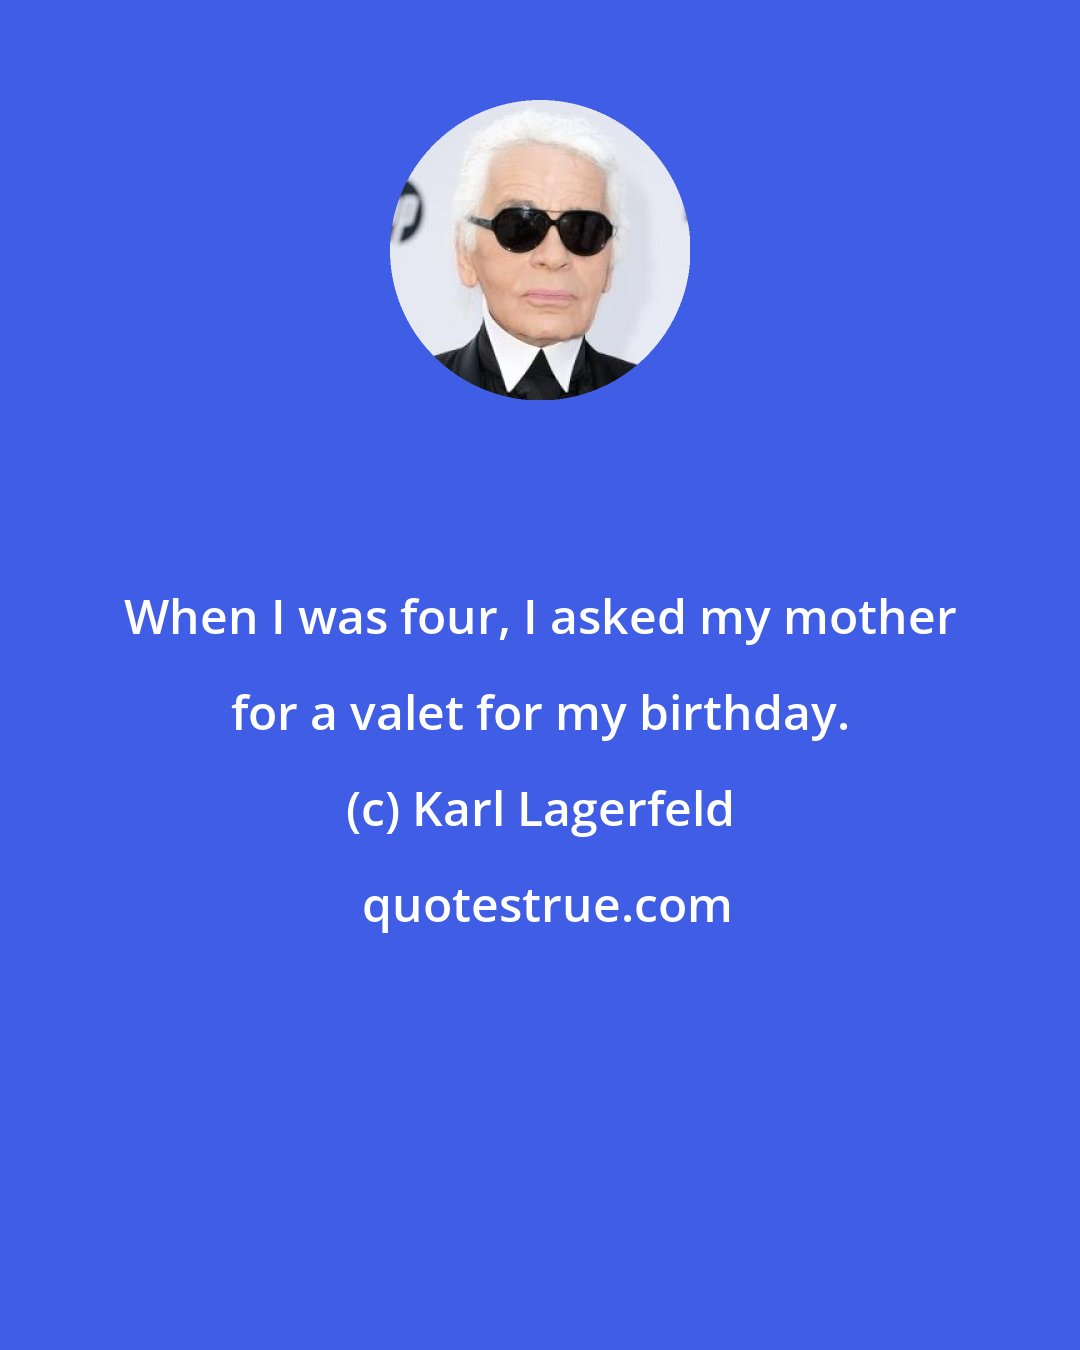 Karl Lagerfeld: When I was four, I asked my mother for a valet for my birthday.